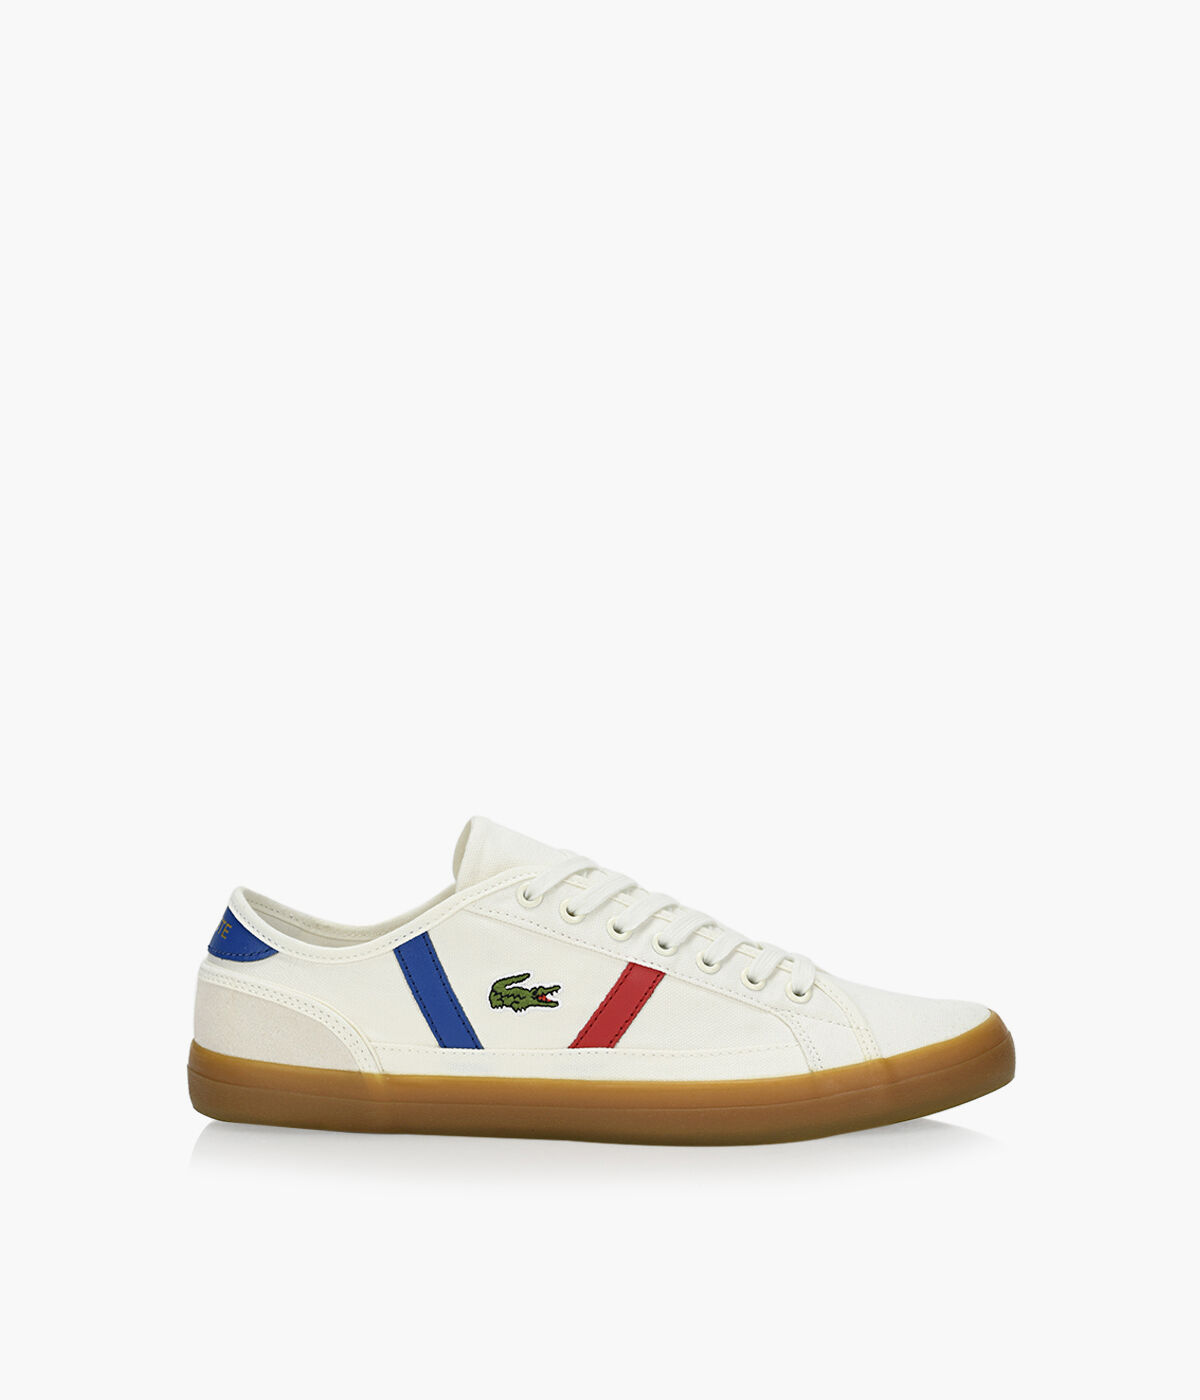 lacoste sideline shoes